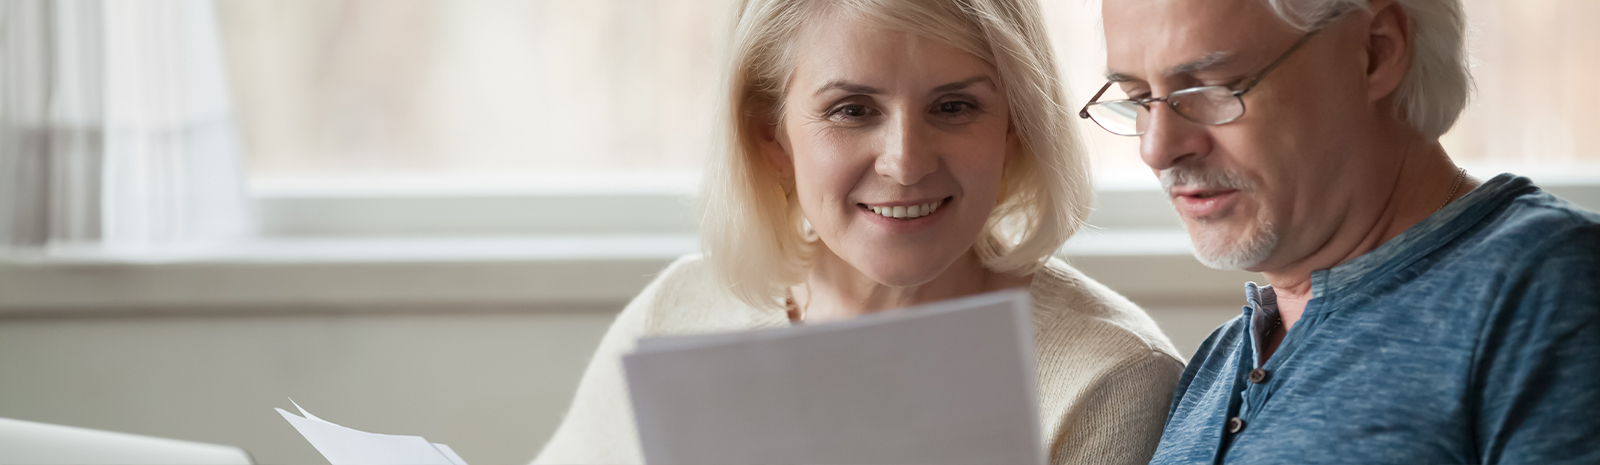 Mature couple smiles while reading paperwork together.